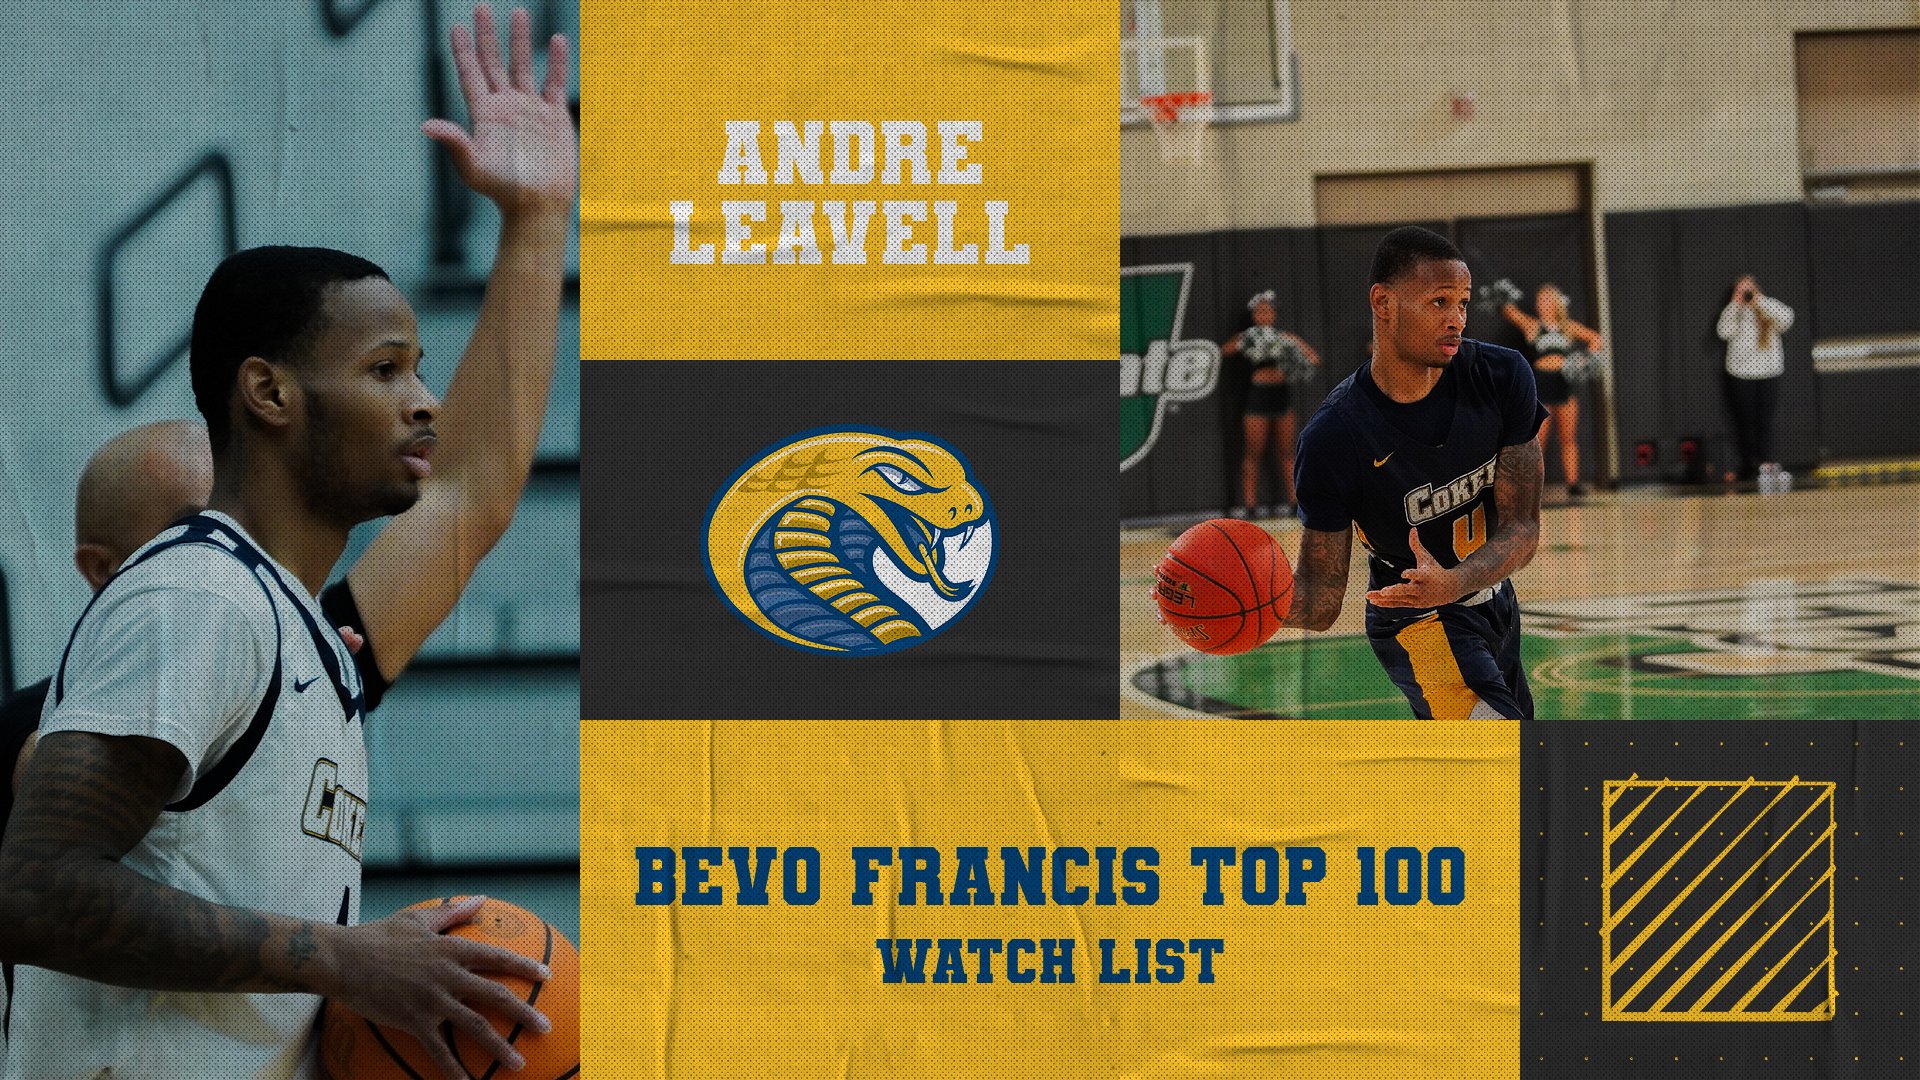 Andre Leavell Named Bevo Francis Top 100 Watch List